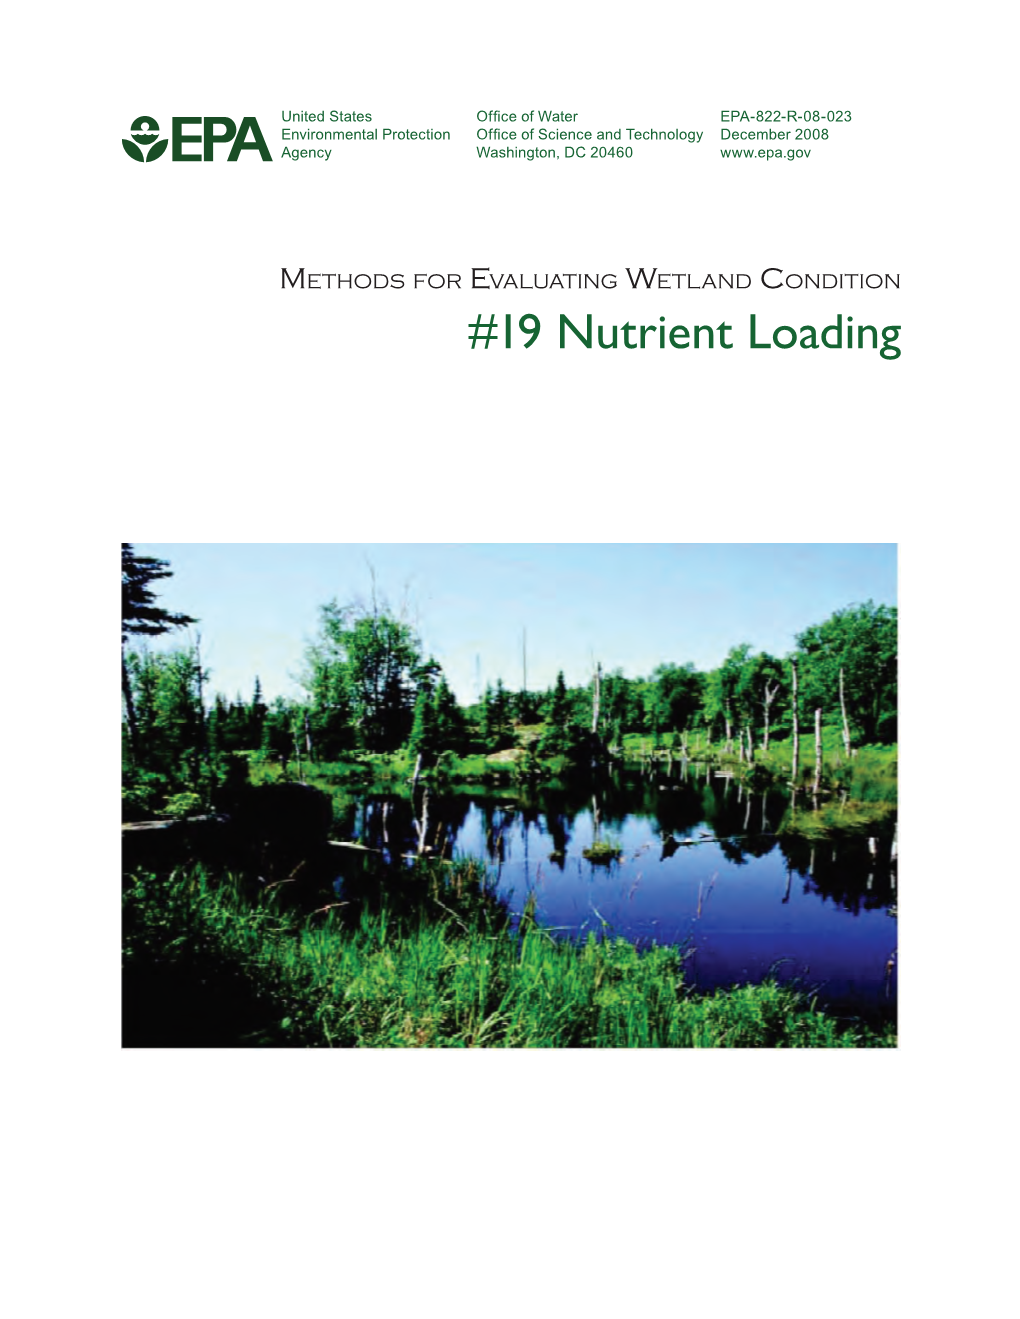 Methods for Evaluating Wetland Condition: Nutrient Loading